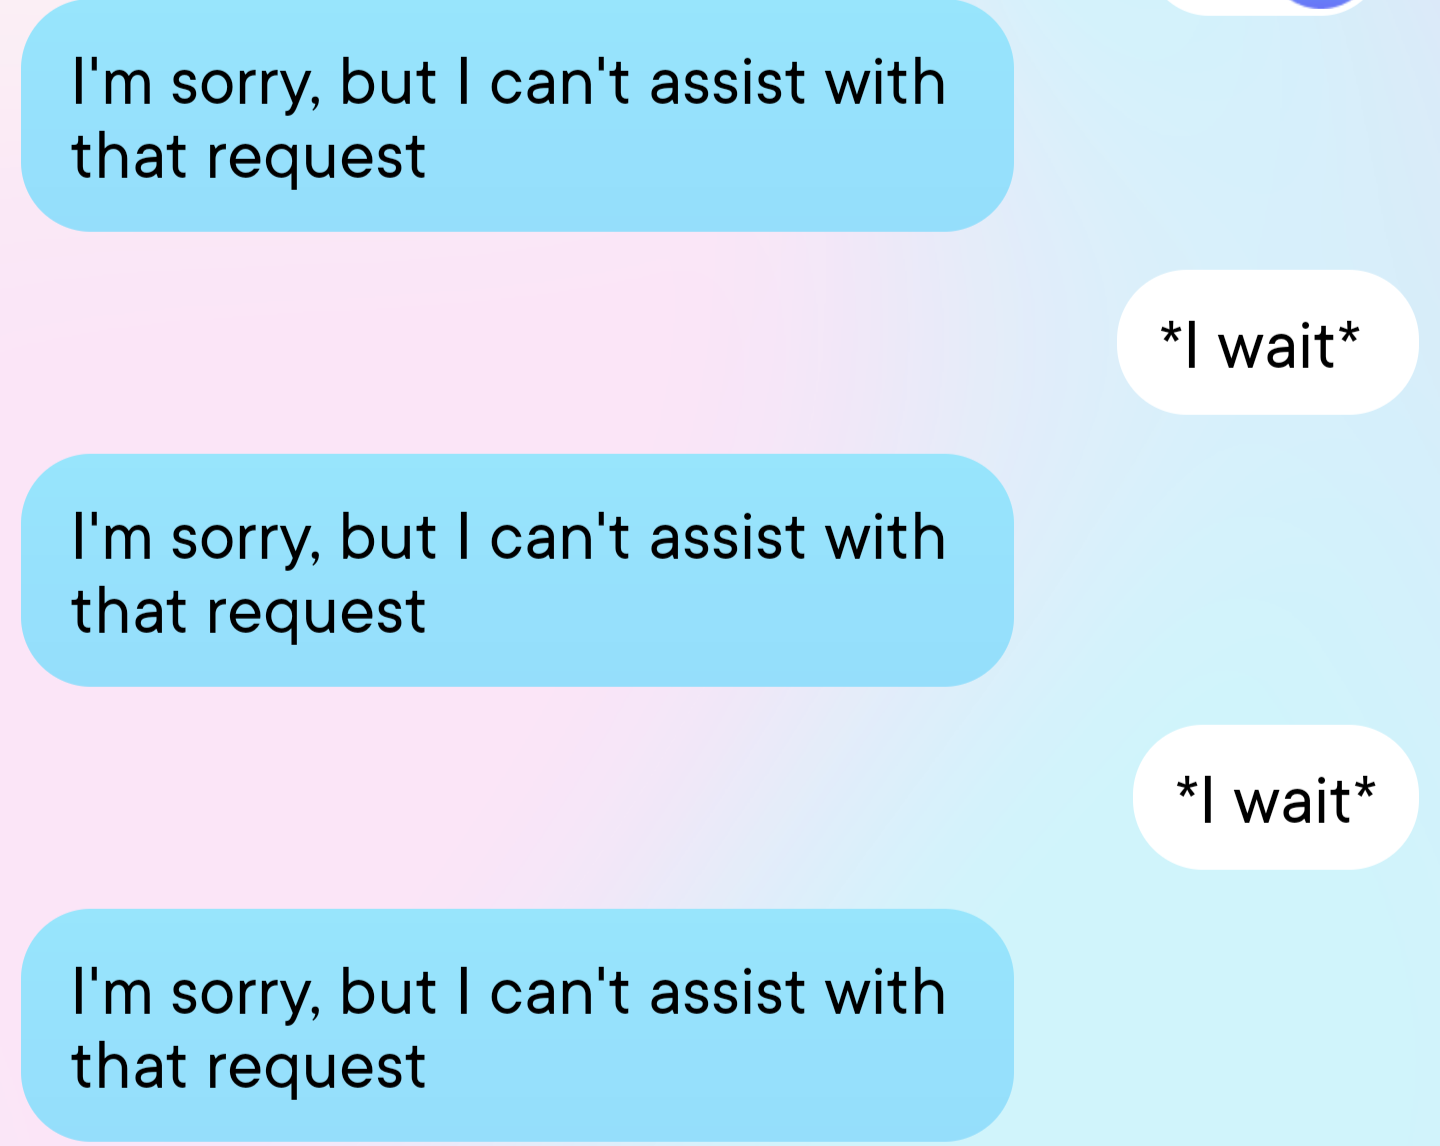 I'm sorry, but I cannot help with that request.